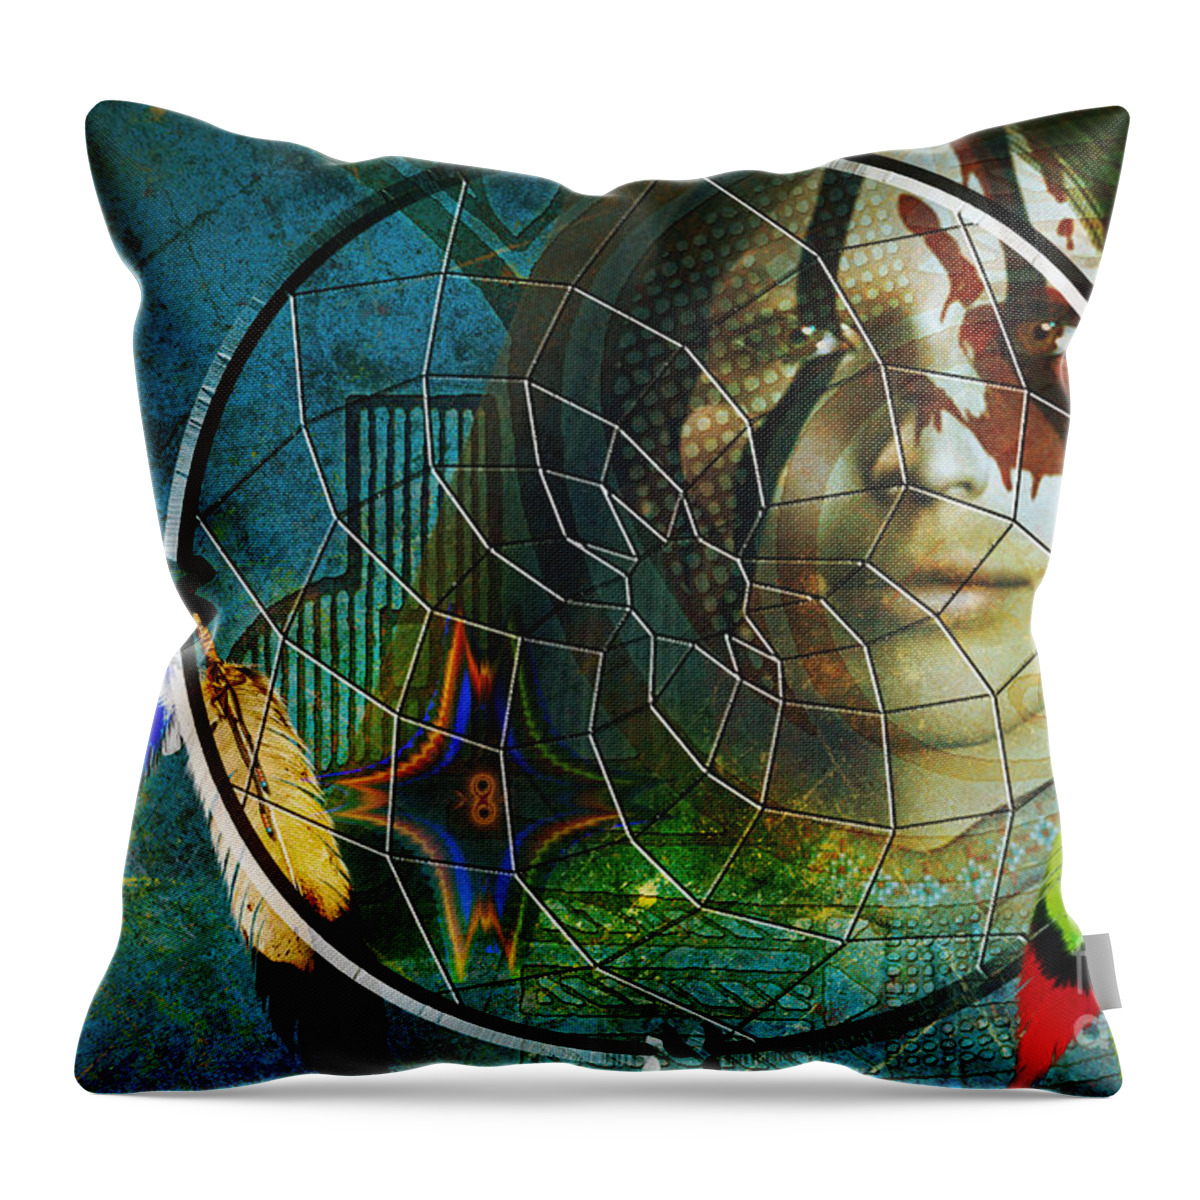 Dream Catcher Throw Pillow featuring the digital art The Dream Catcher by Shadowlea Is